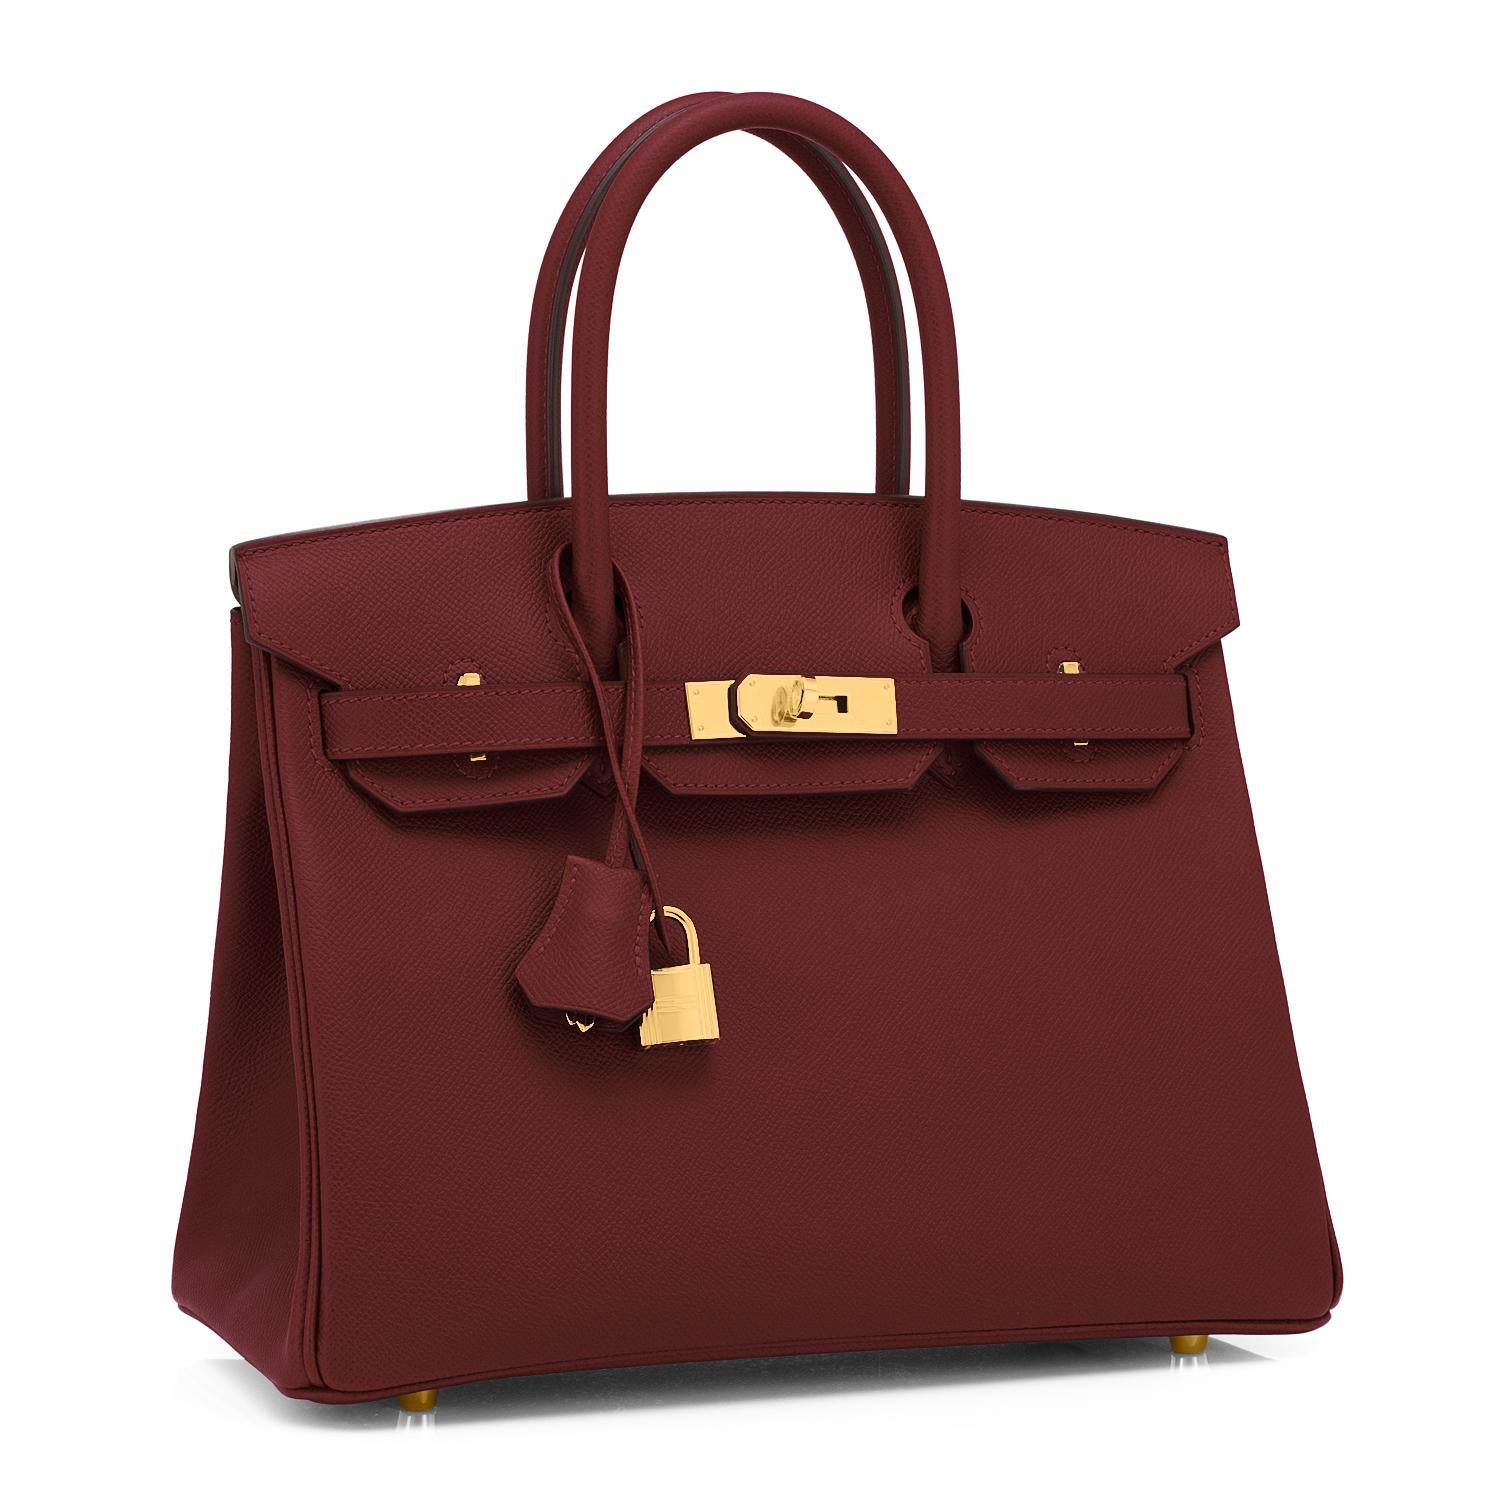 Hermes Rouge H 30cm Birkin Epsom Gold Hardware Y Stamp, 2020
Devastatingly gorgeous!!
Brand New in Box.  Store Fresh.  Pristine Condition (with plastic on hardware).
Just purchased from Hermes store! Bag bears new interior 2020 Y Stamp.
Perfect